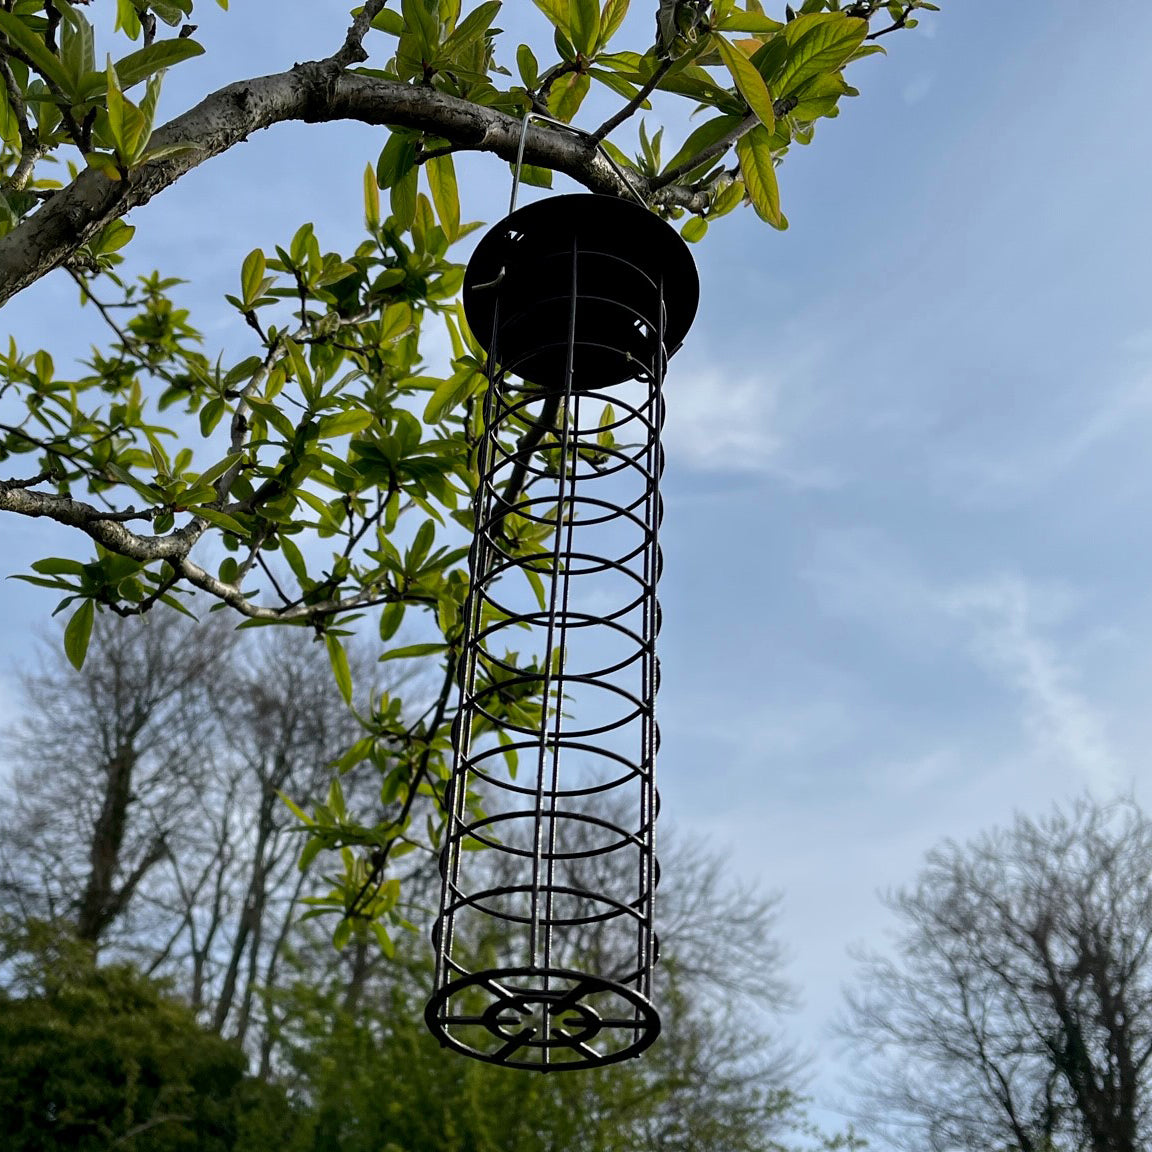 Large Hanging Fatball Bird Feeder For Selections Feeding Stations